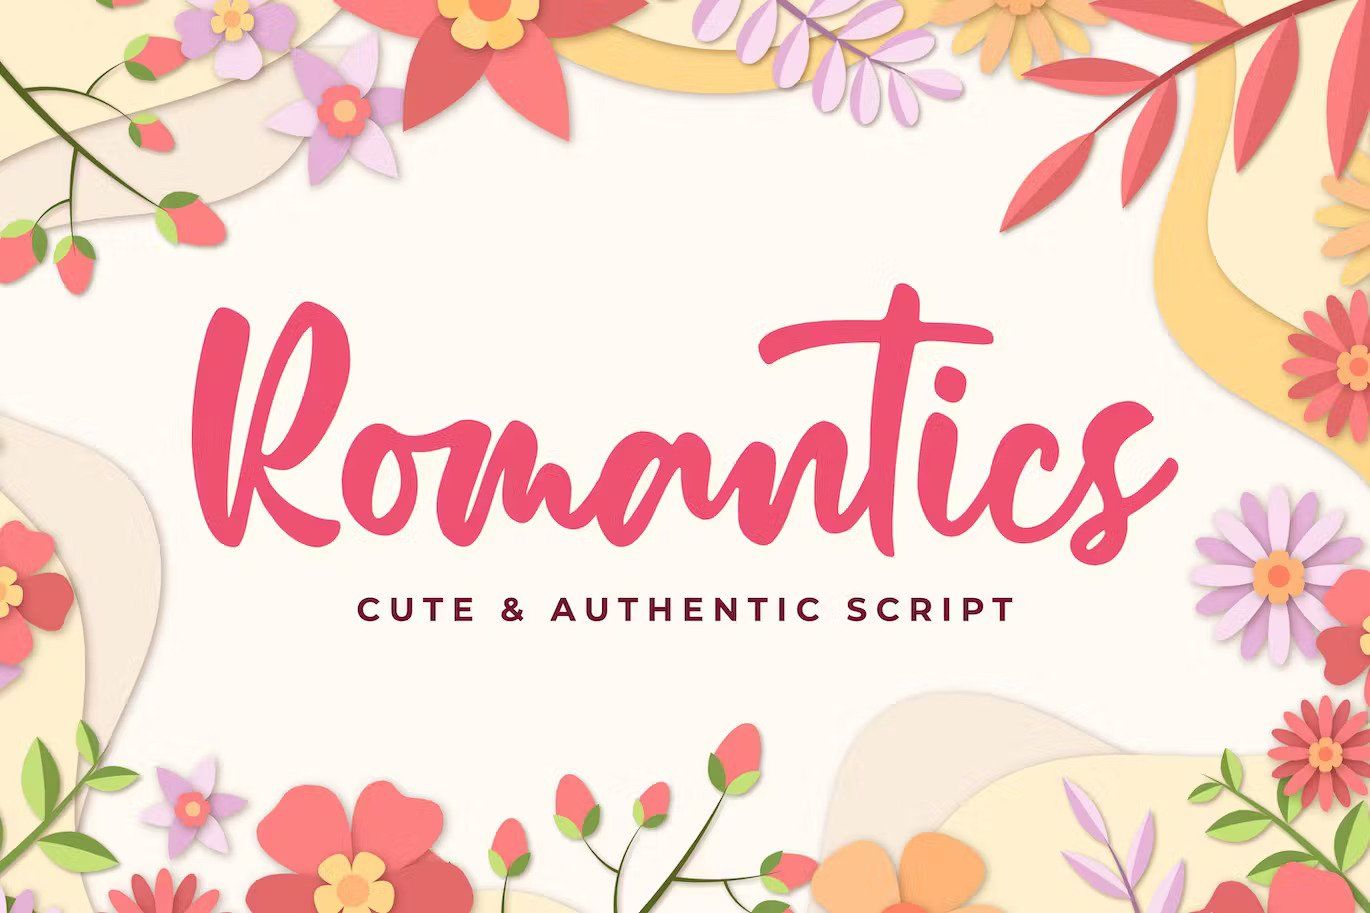 A cute and authentic script font